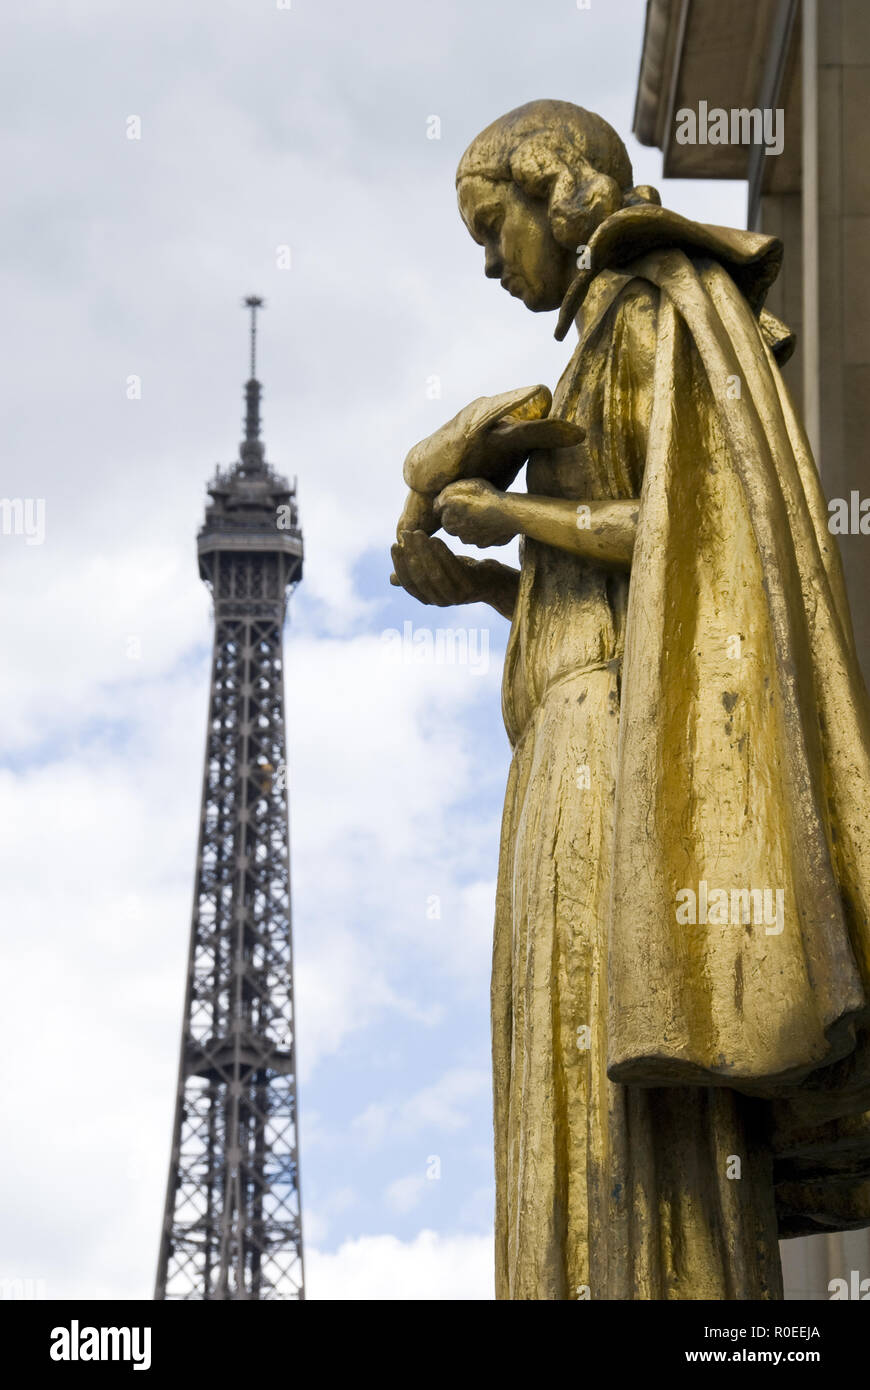 The Eiffel Tower as seen from the Place du Trocadero where gold figures stand representing the rights of man, Paris, France. Stock Photo